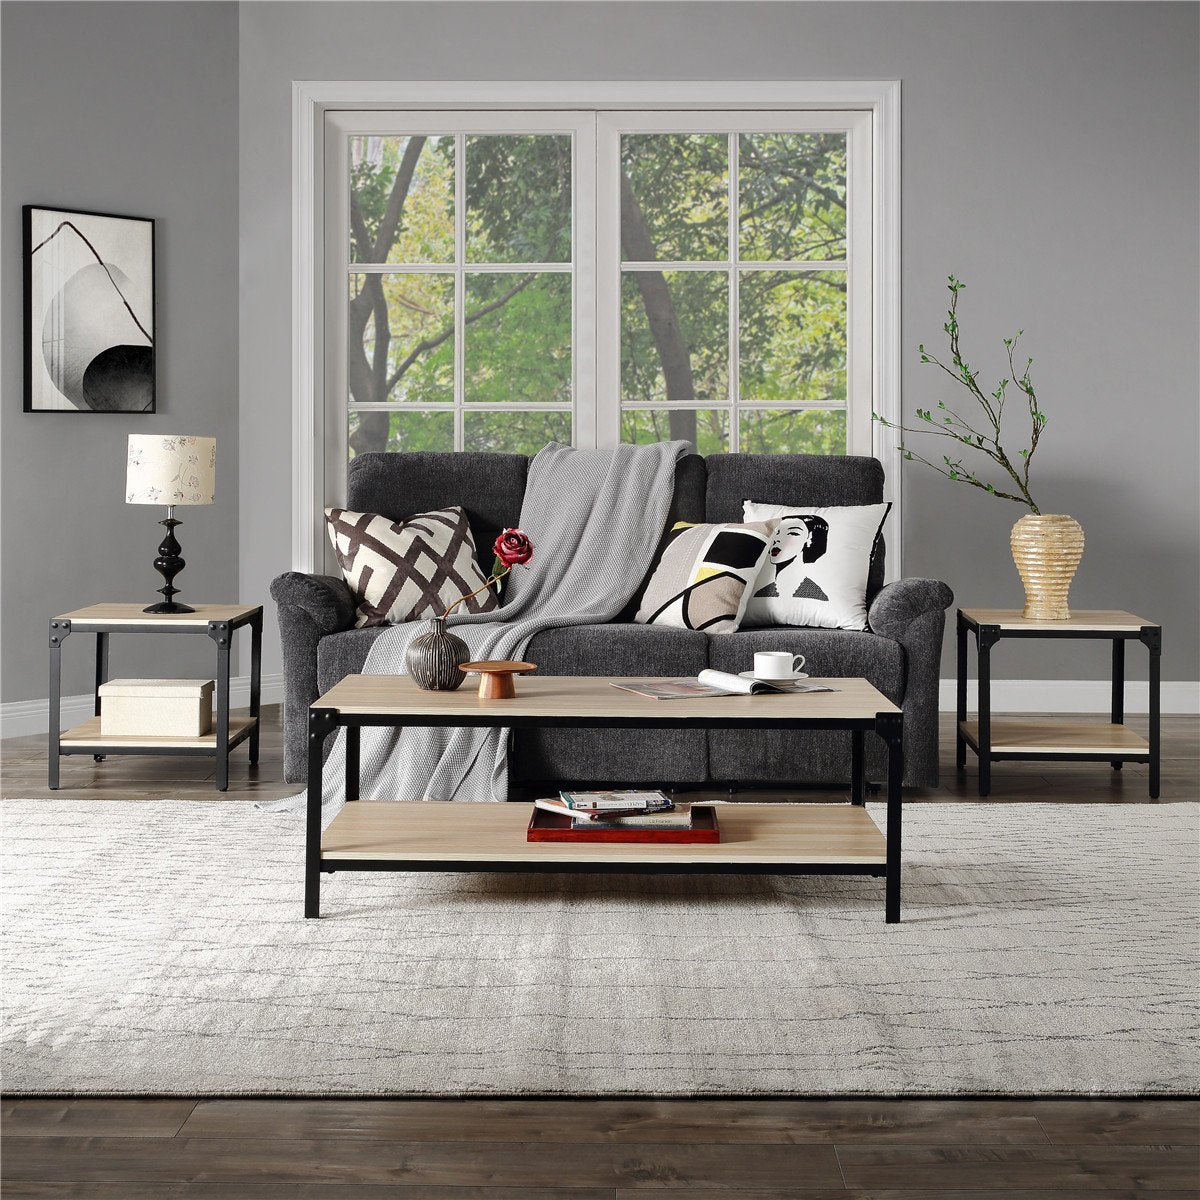 Industrial Coffee Table for Living Room | Wood Look Accent Furniture